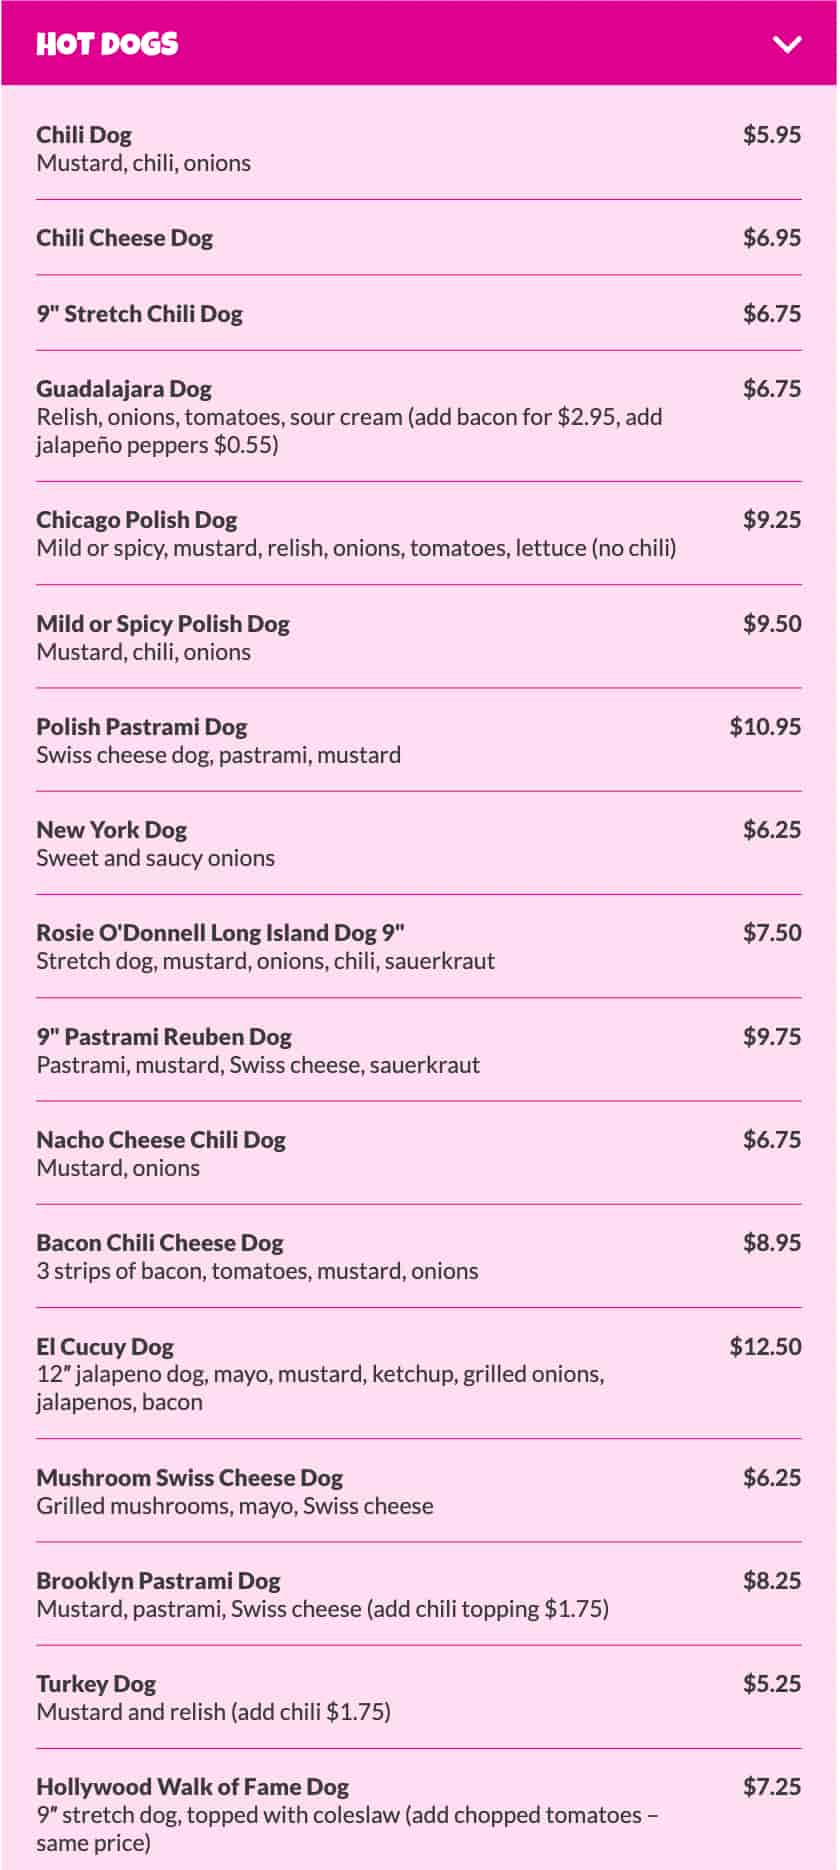 Pink's Hot Dogs Hot Dogs Menu